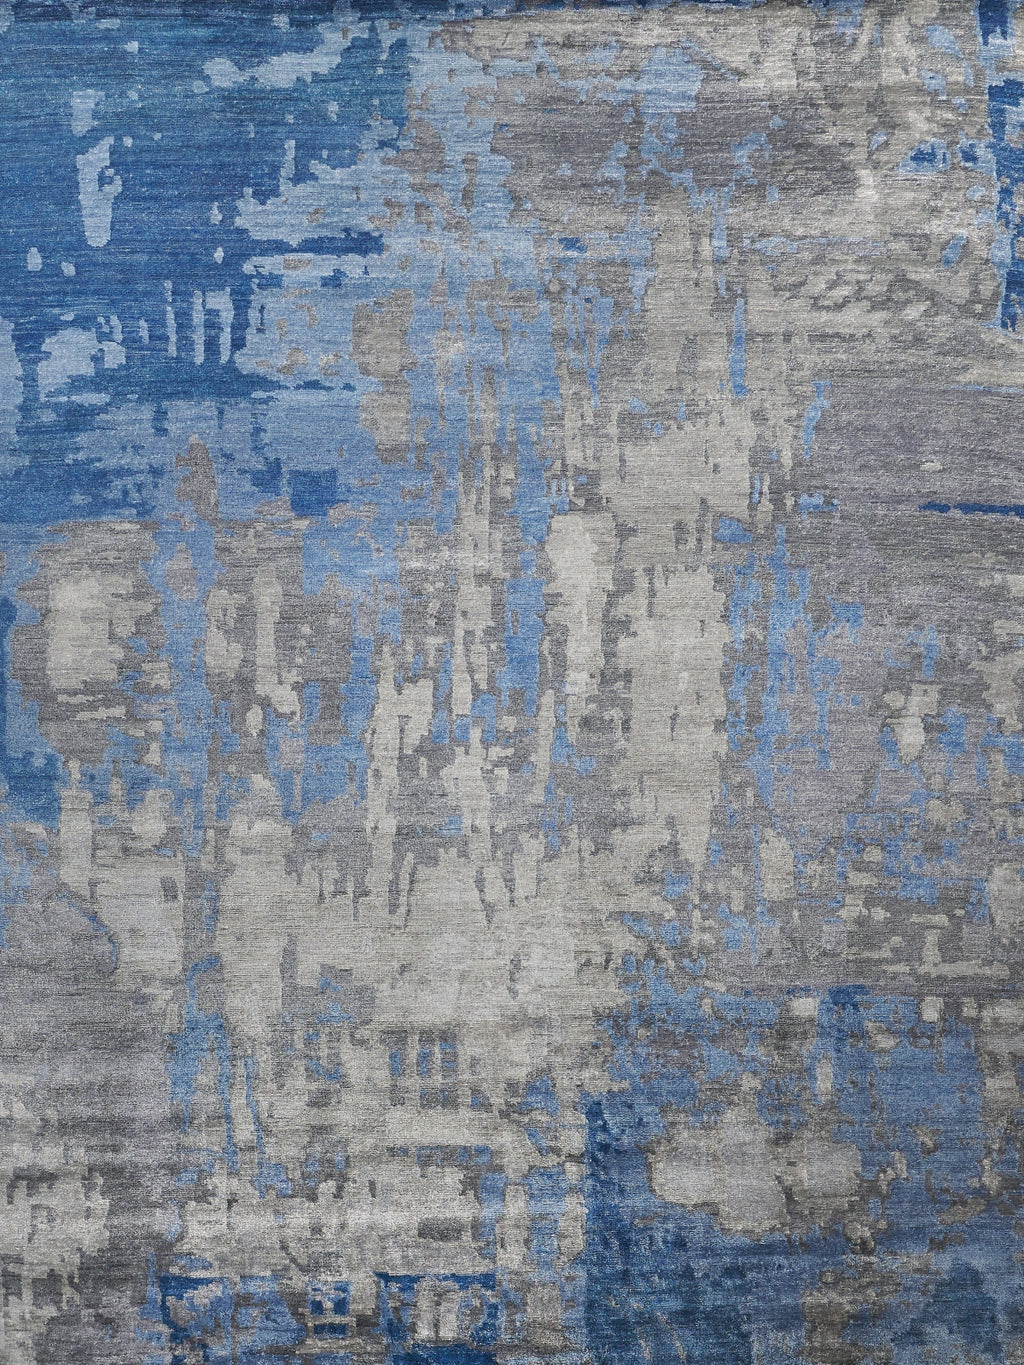 Exquisite Rugs Bamboo Silk 3339 Blue/Gray Area Rug